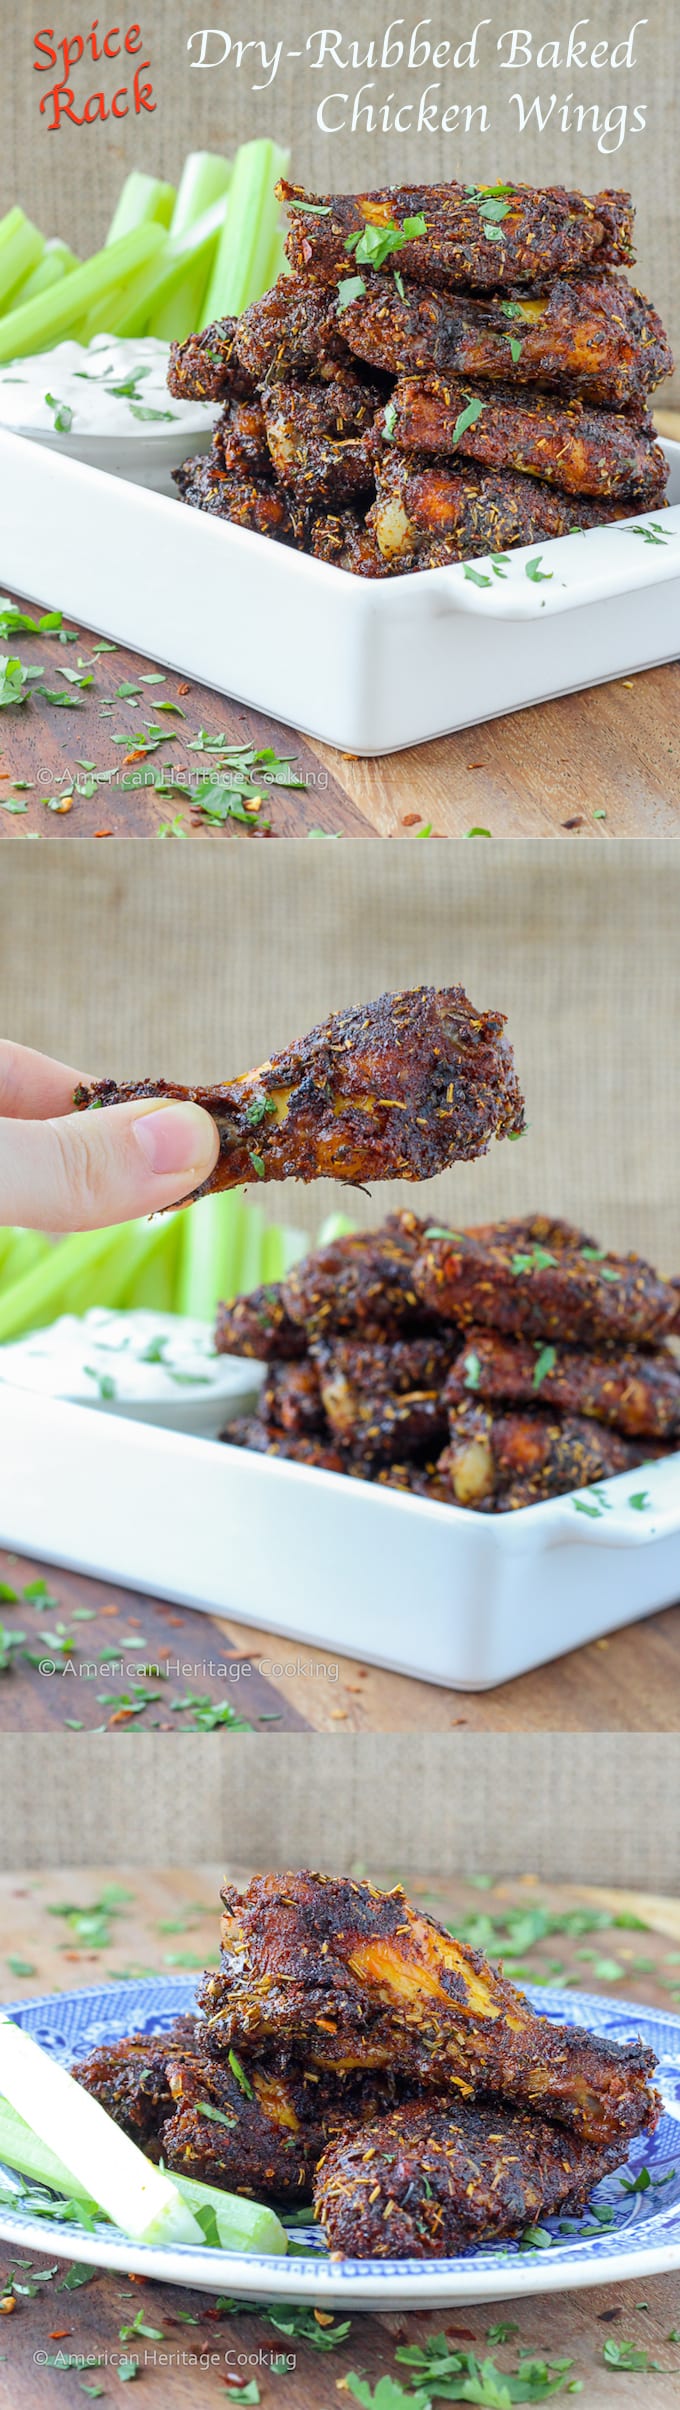 Spice Rack Dry Rubbed Baked Chicken Wings